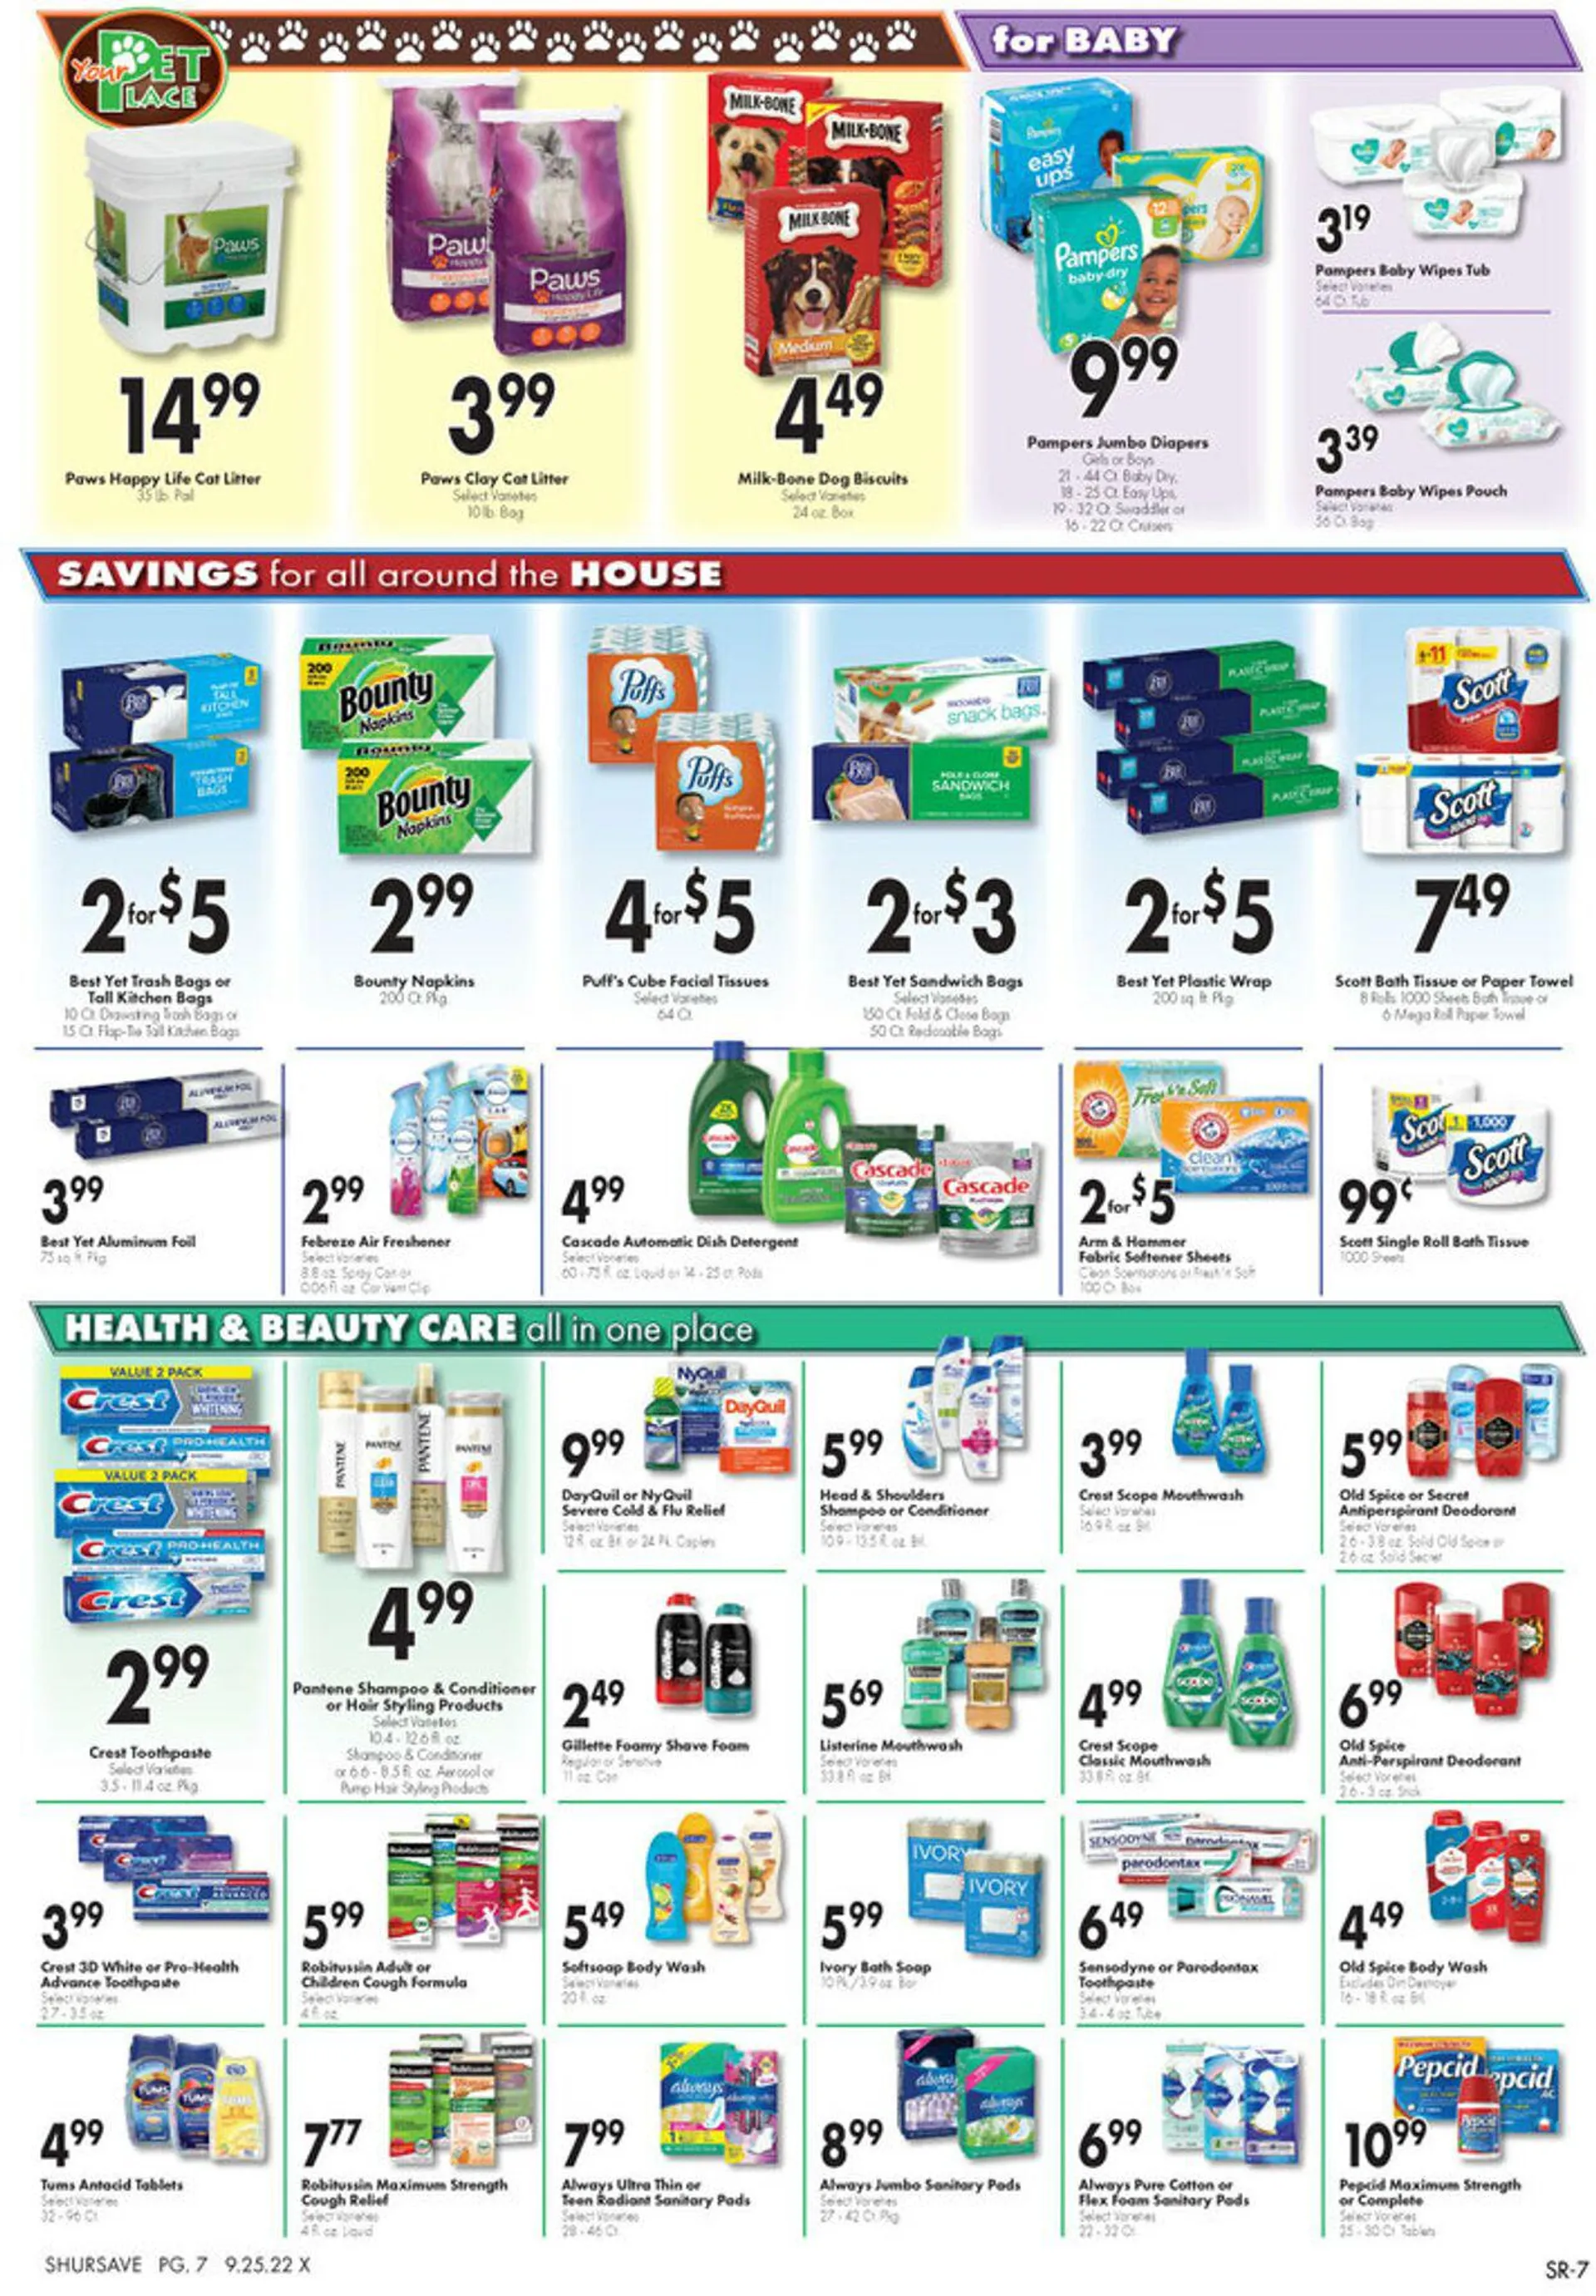 Gerritys Supermarkets Current weekly ad - 8